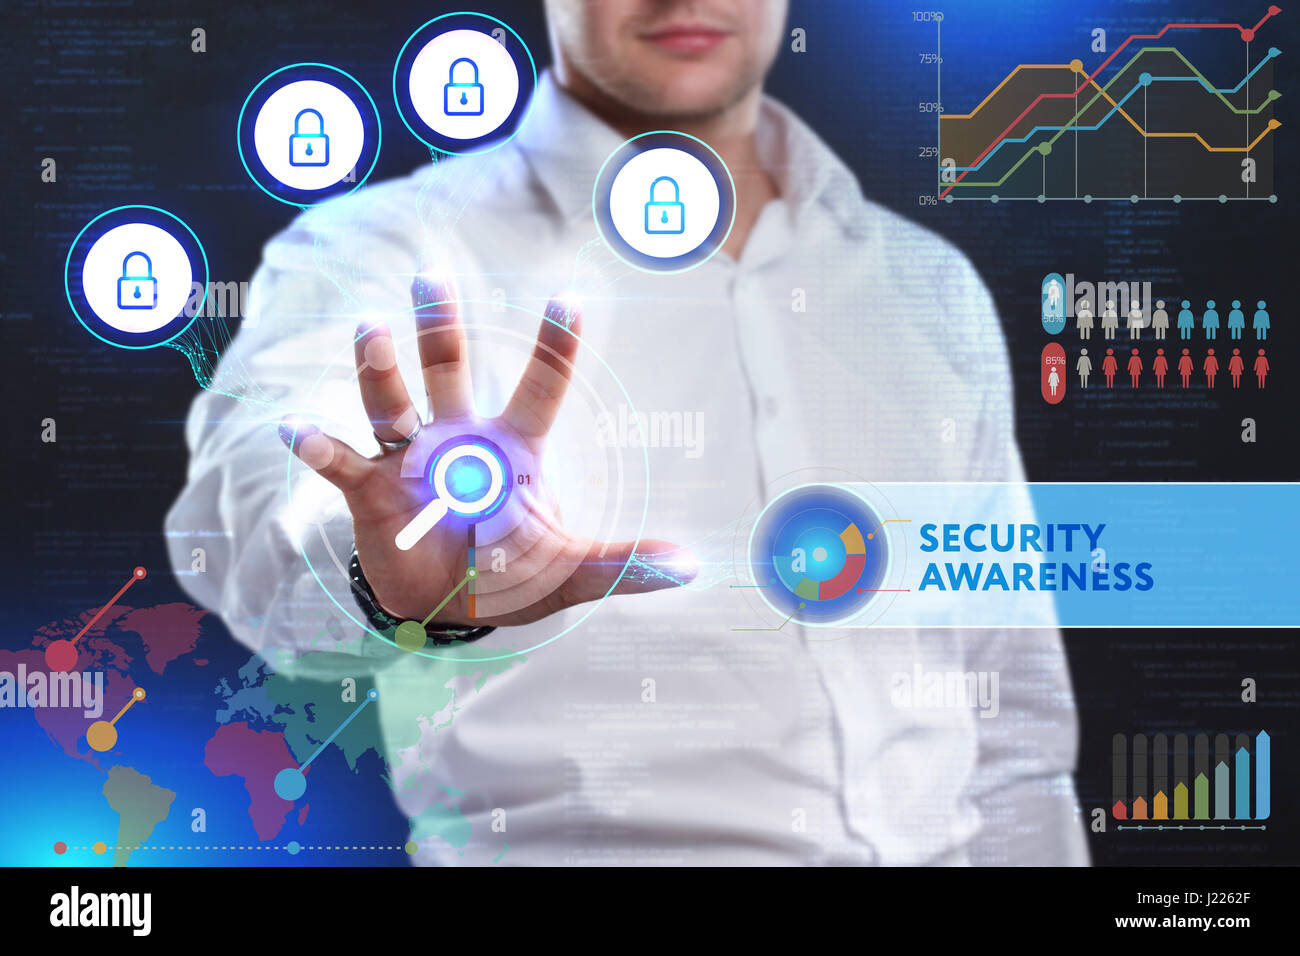 Concept of business security, safety of information from virus, crime and attack. Internet secure system. Protection system. Security awareness Stock Photo